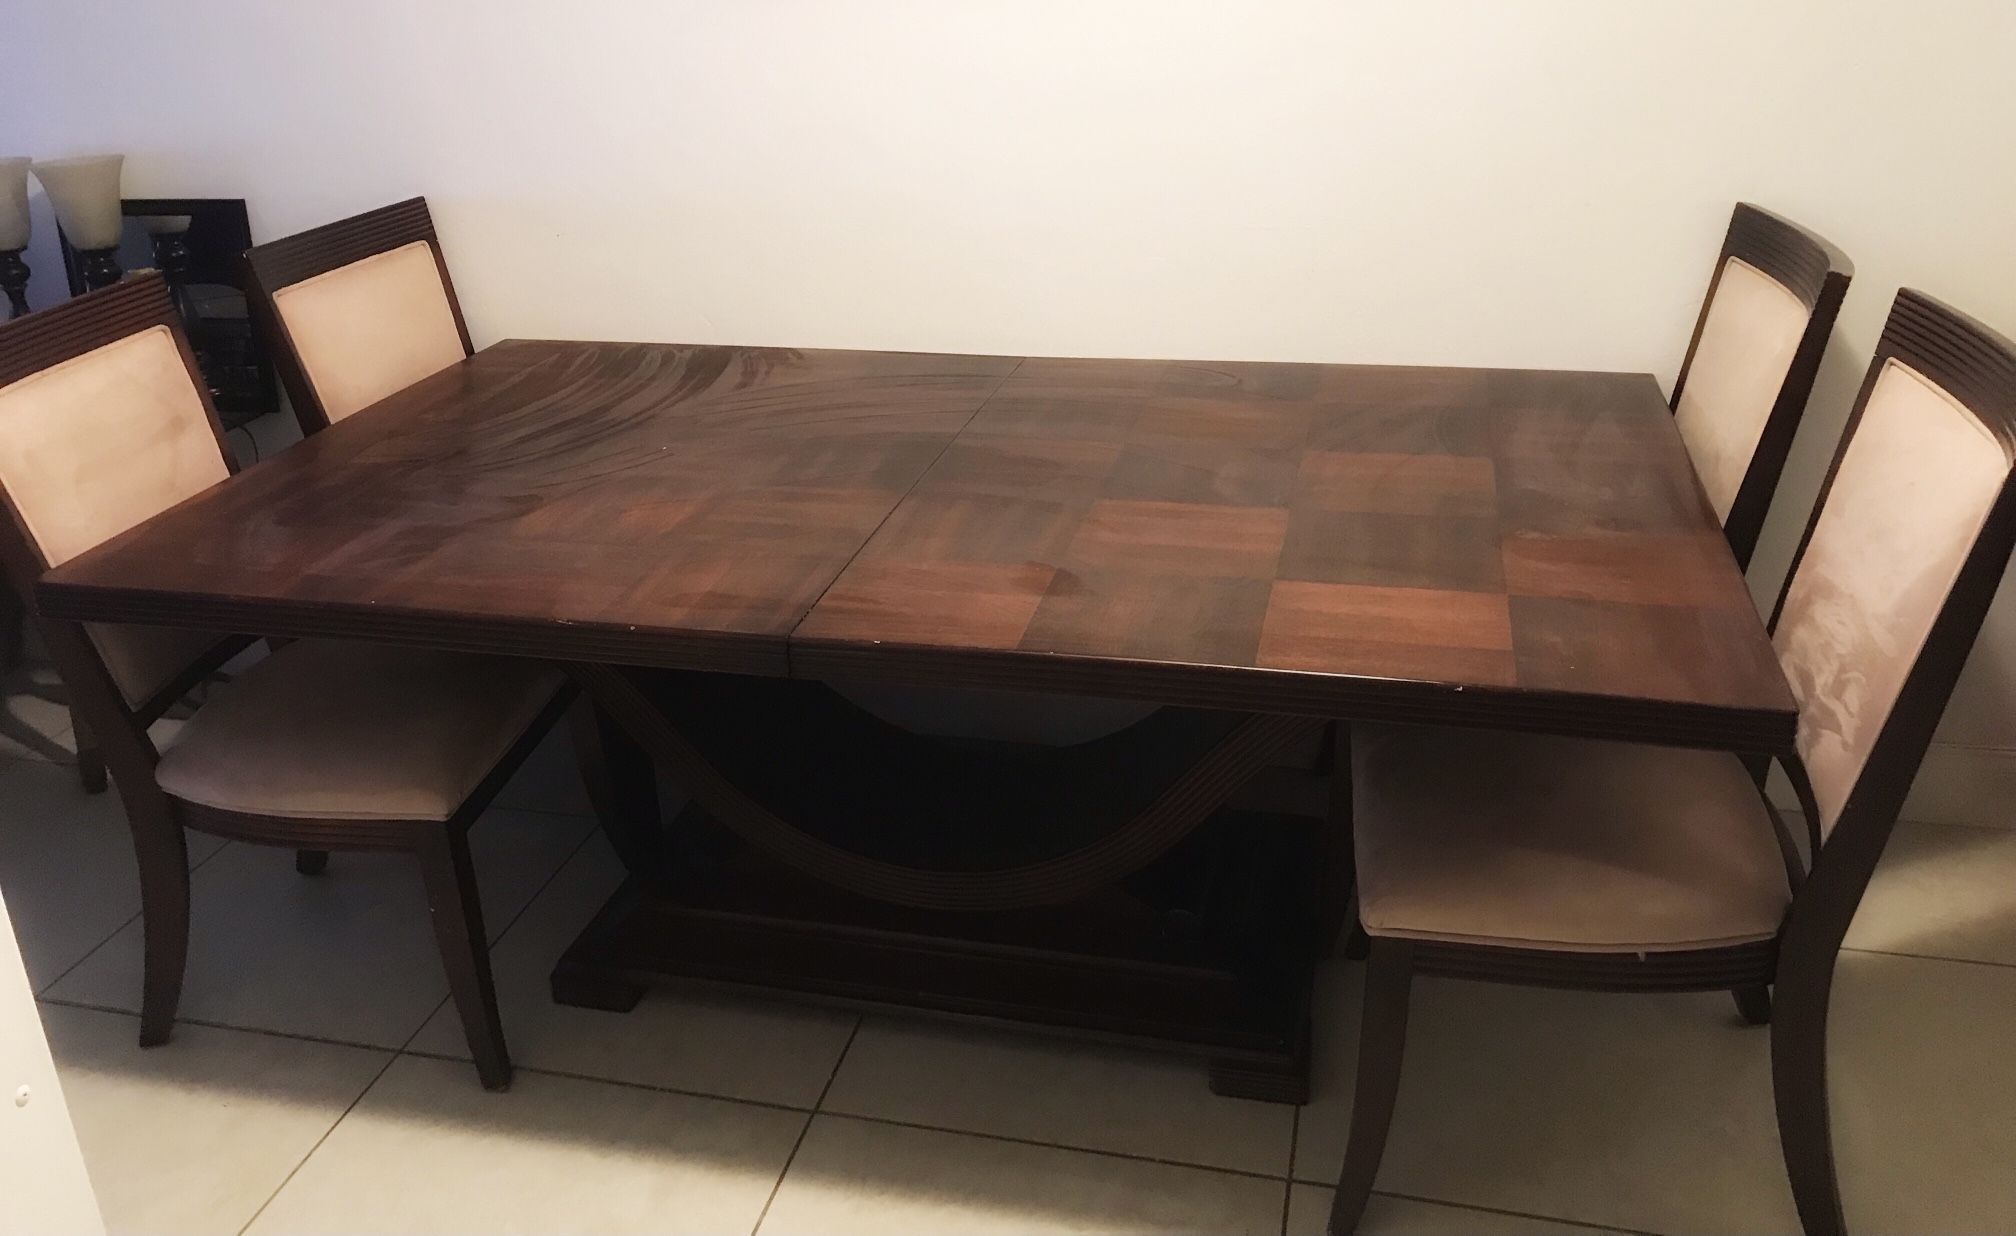 FREE Large Brown Kitchen Table  (NEED GONE ASAP) Serious Inquiries ONLY 